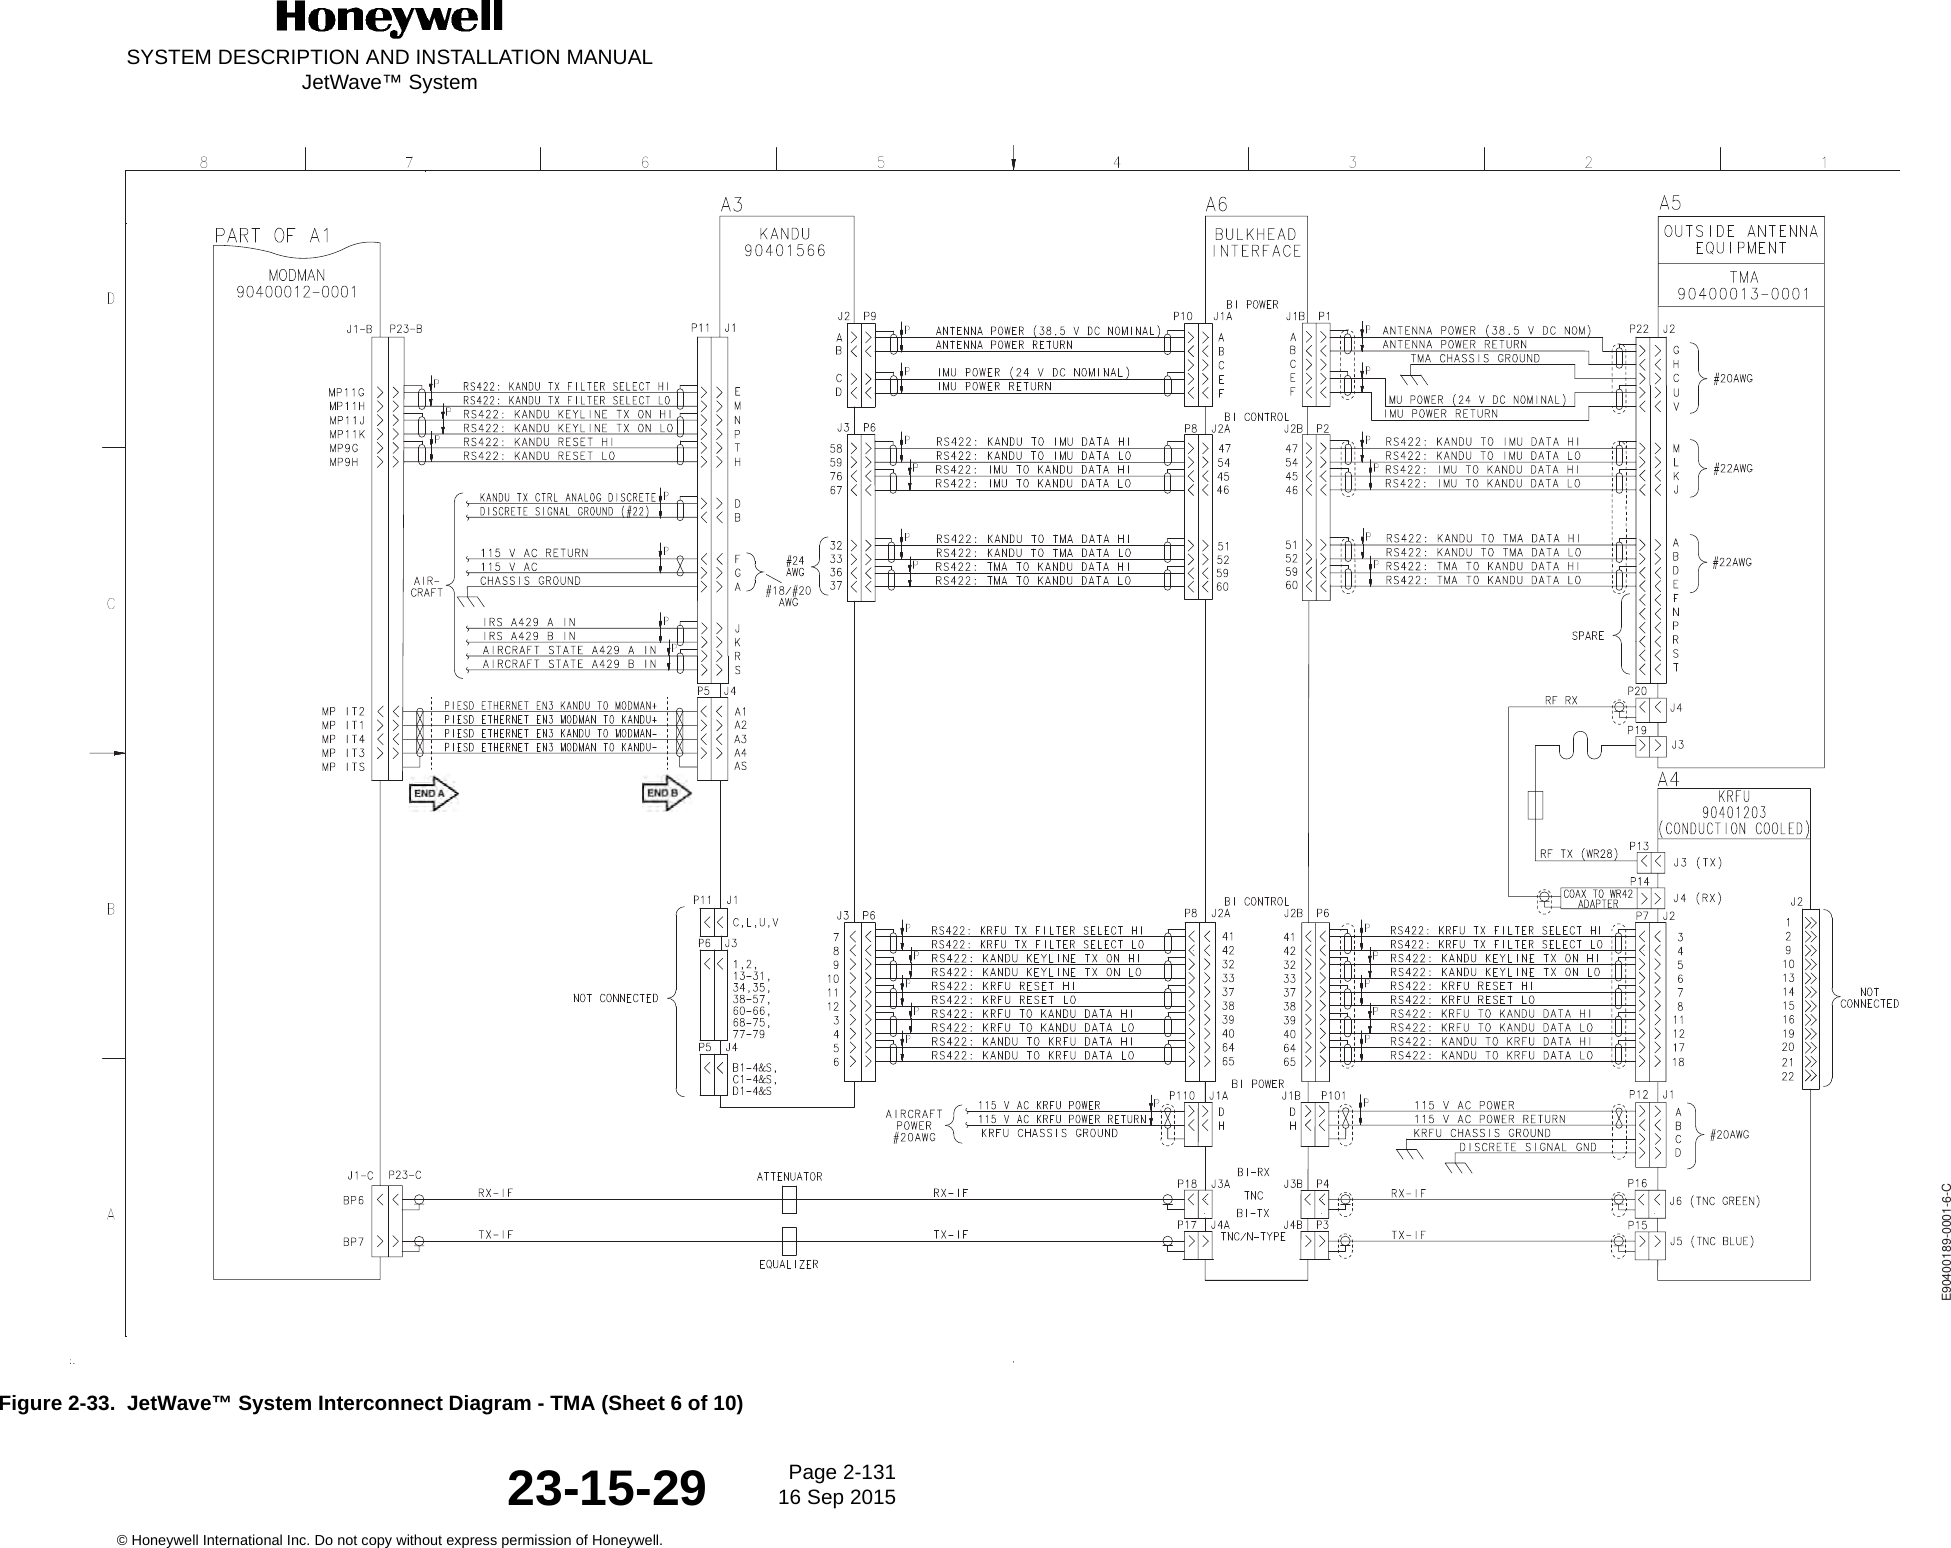 SYSTEM DESCRIPTION AND INSTALLATION MANUALJetWave™ SystemPage 2-131 16 Sep 2015© Honeywell International Inc. Do not copy without express permission of Honeywell.23-15-29Figure 2-33.  JetWave™ System Interconnect Diagram - TMA (Sheet 6 of 10)E90400189-0001-6-C